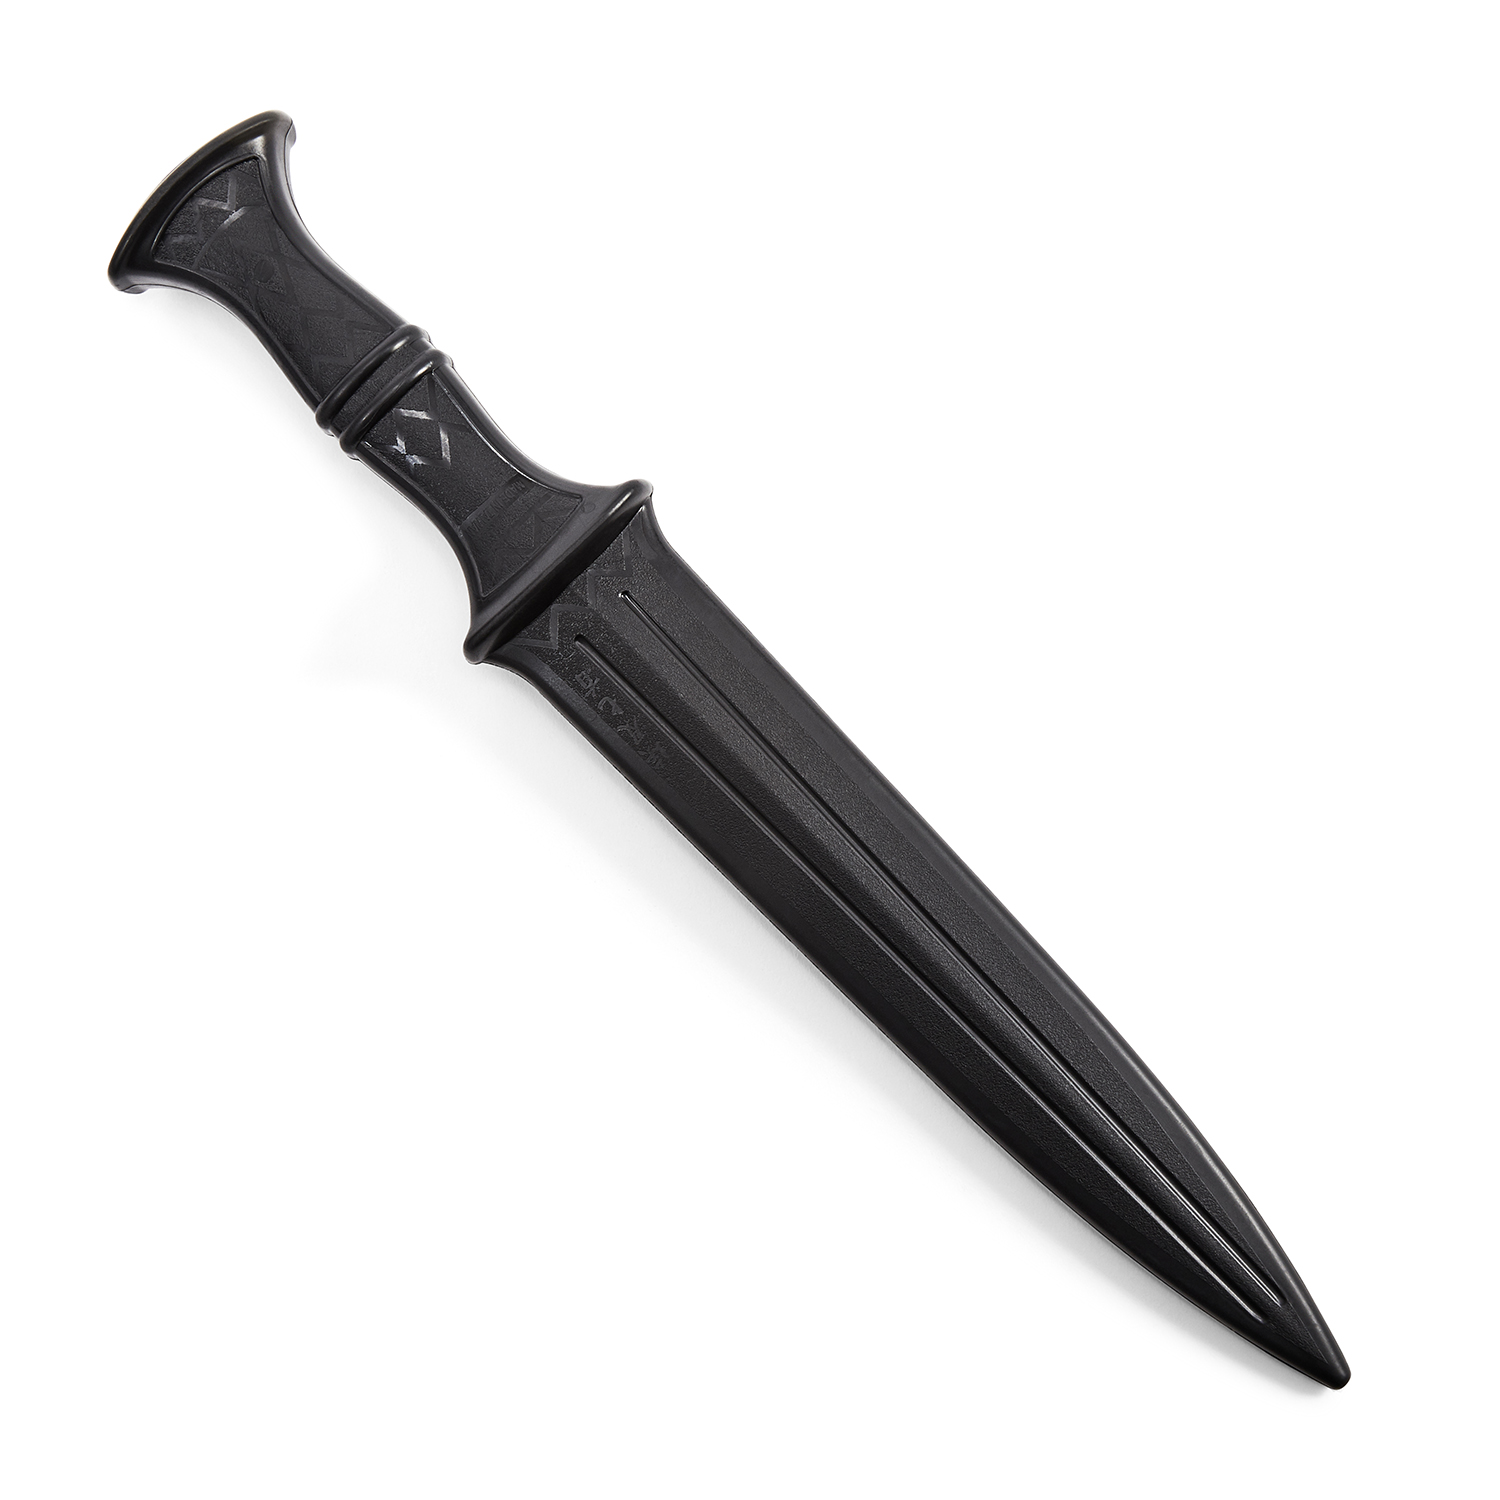 TPR Rubber "Egyptian Dagger" Training Knife - Click Image to Close